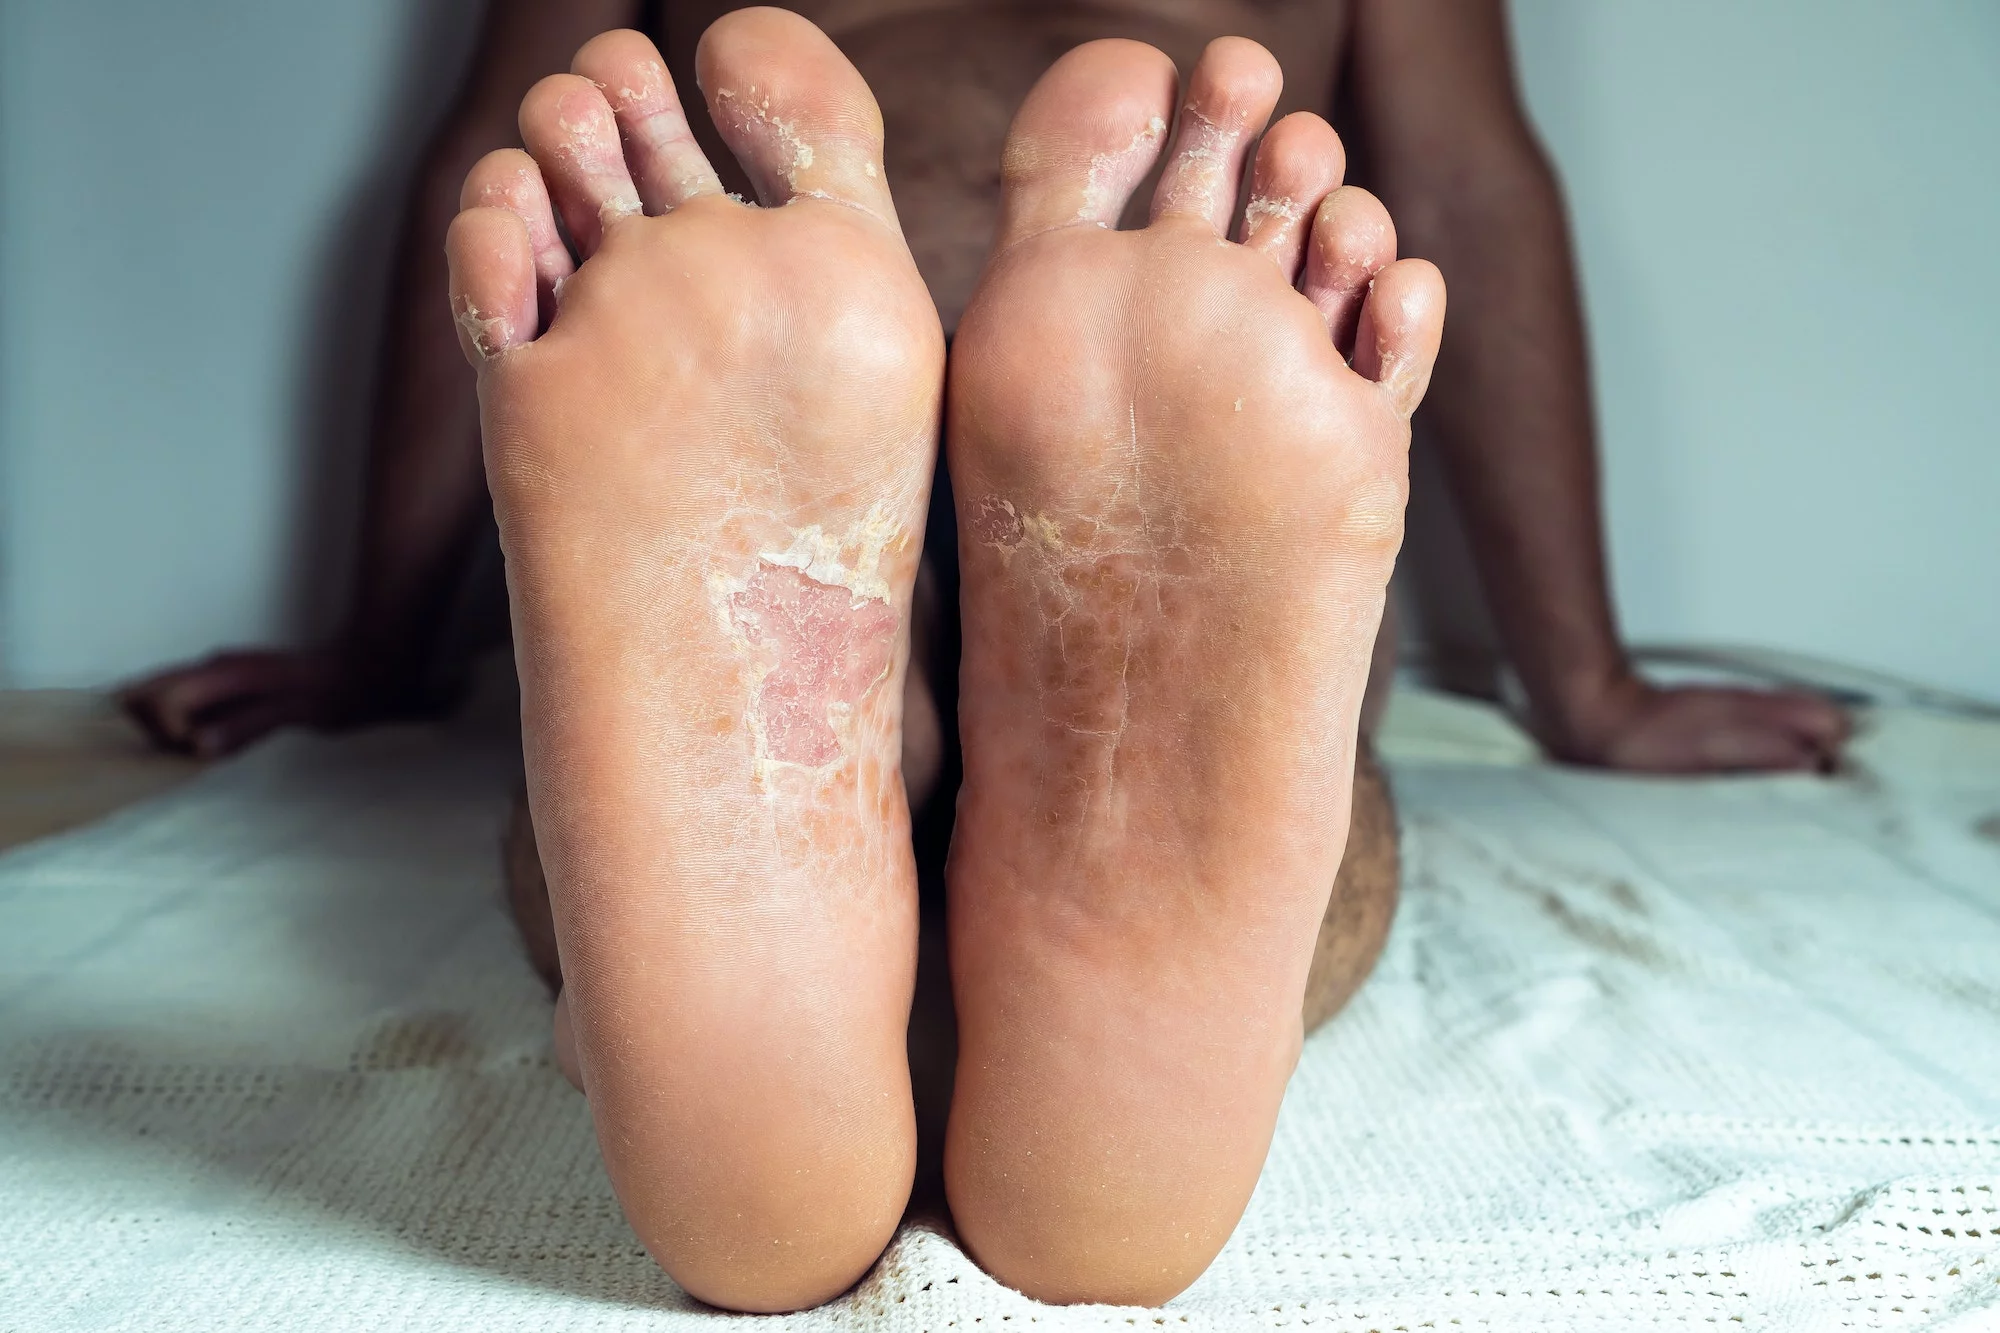 Why One Foot, Ankle, or Leg Might Be Swollen